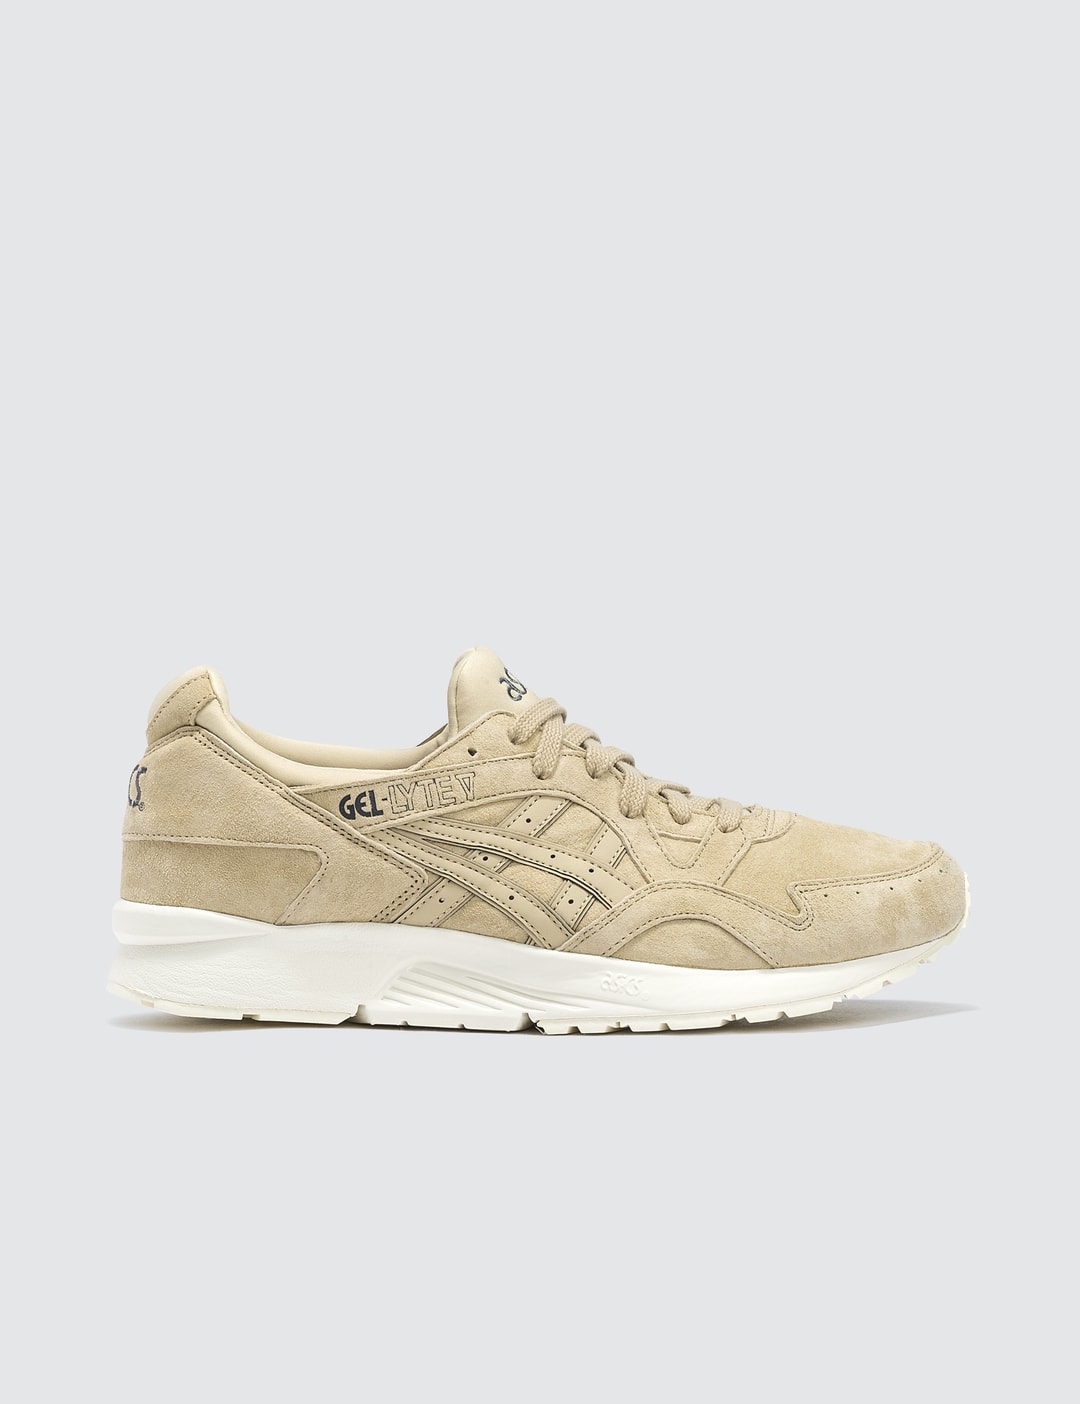 Maldición Convocar Bolos Asics - Gel-Lyte V "Rose Gold" Pack | HBX - Globally Curated Fashion and  Lifestyle by Hypebeast